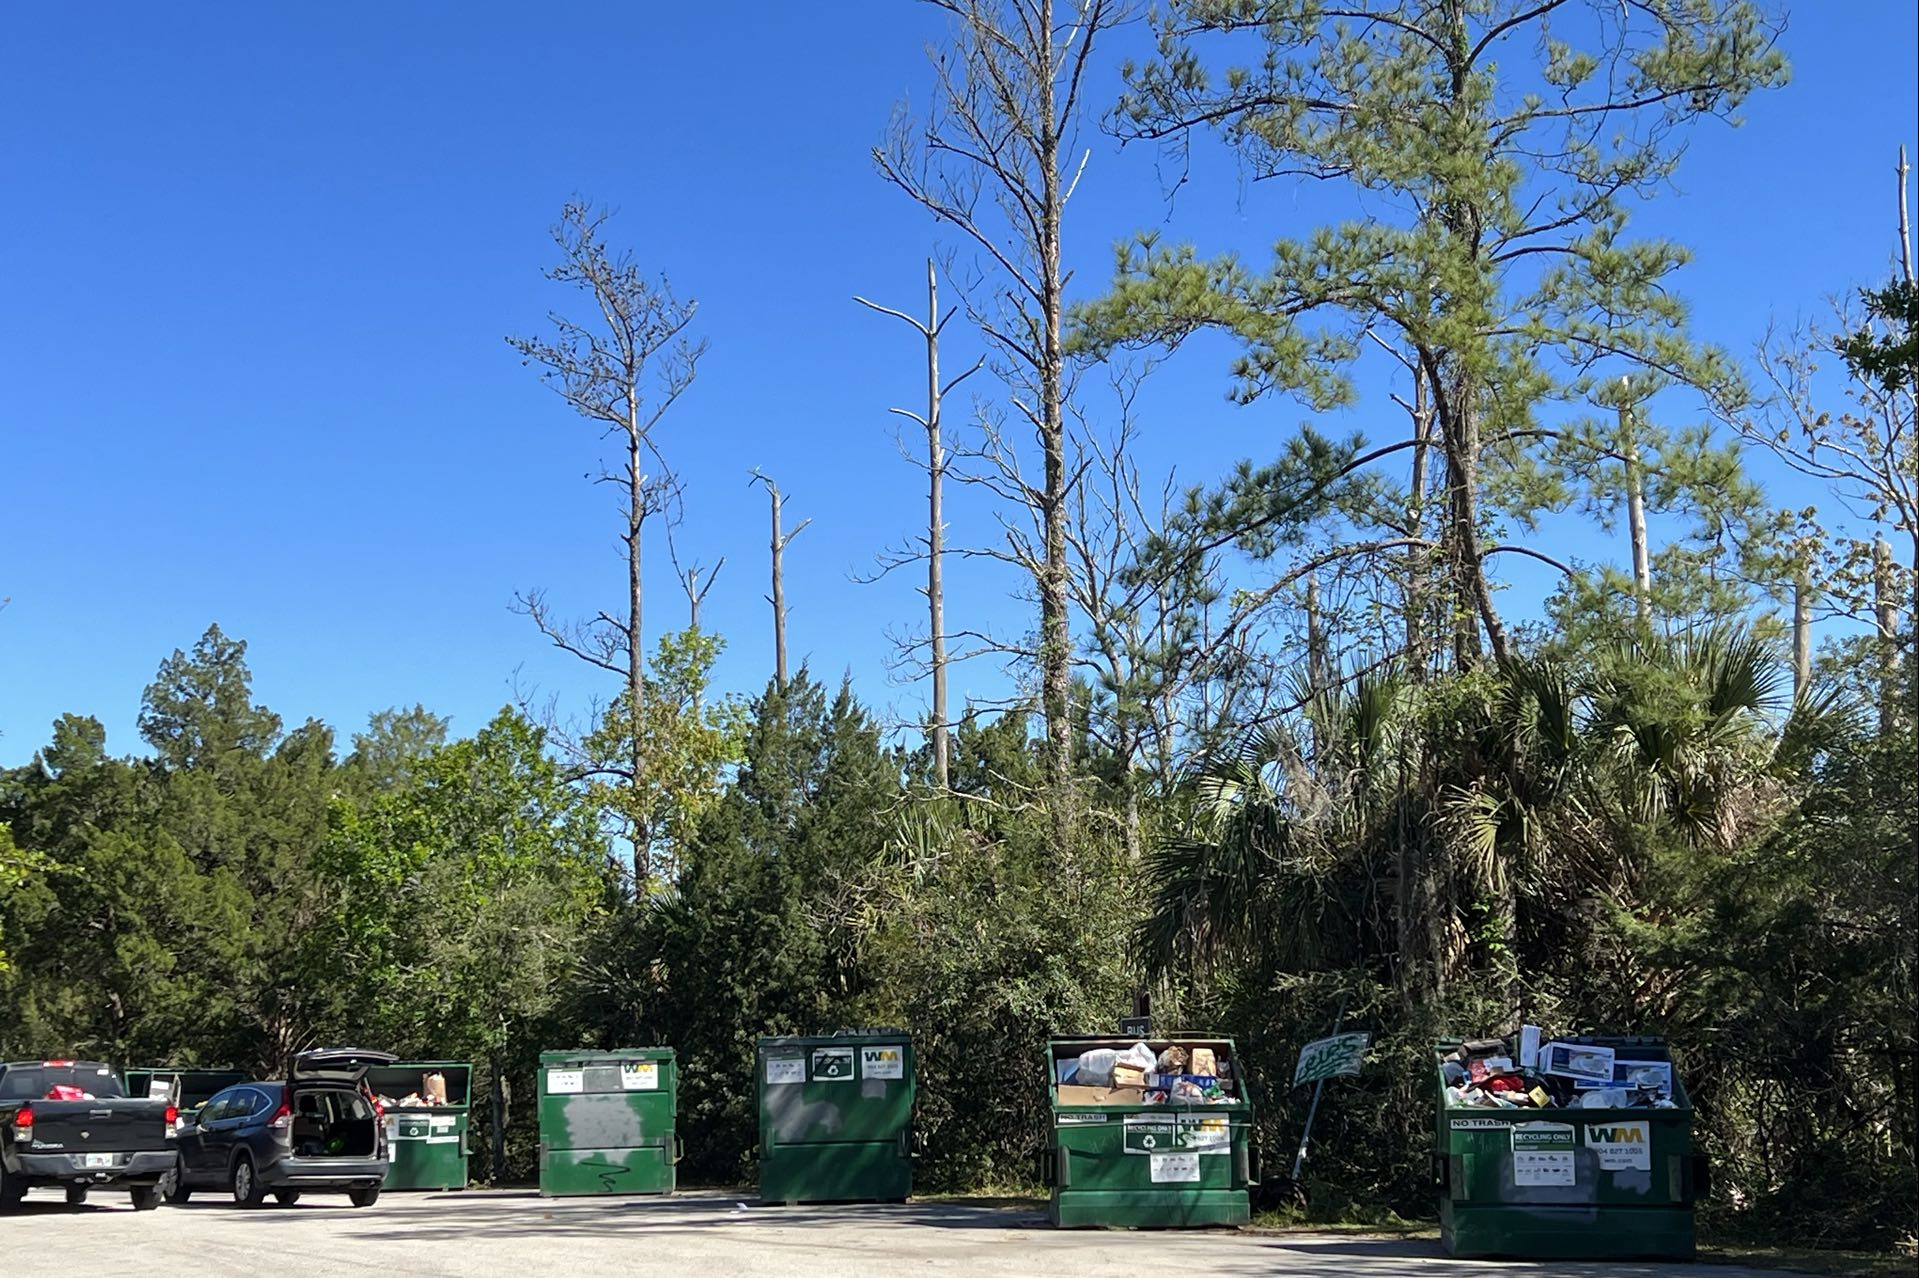 Five big dumpsters located in another city park